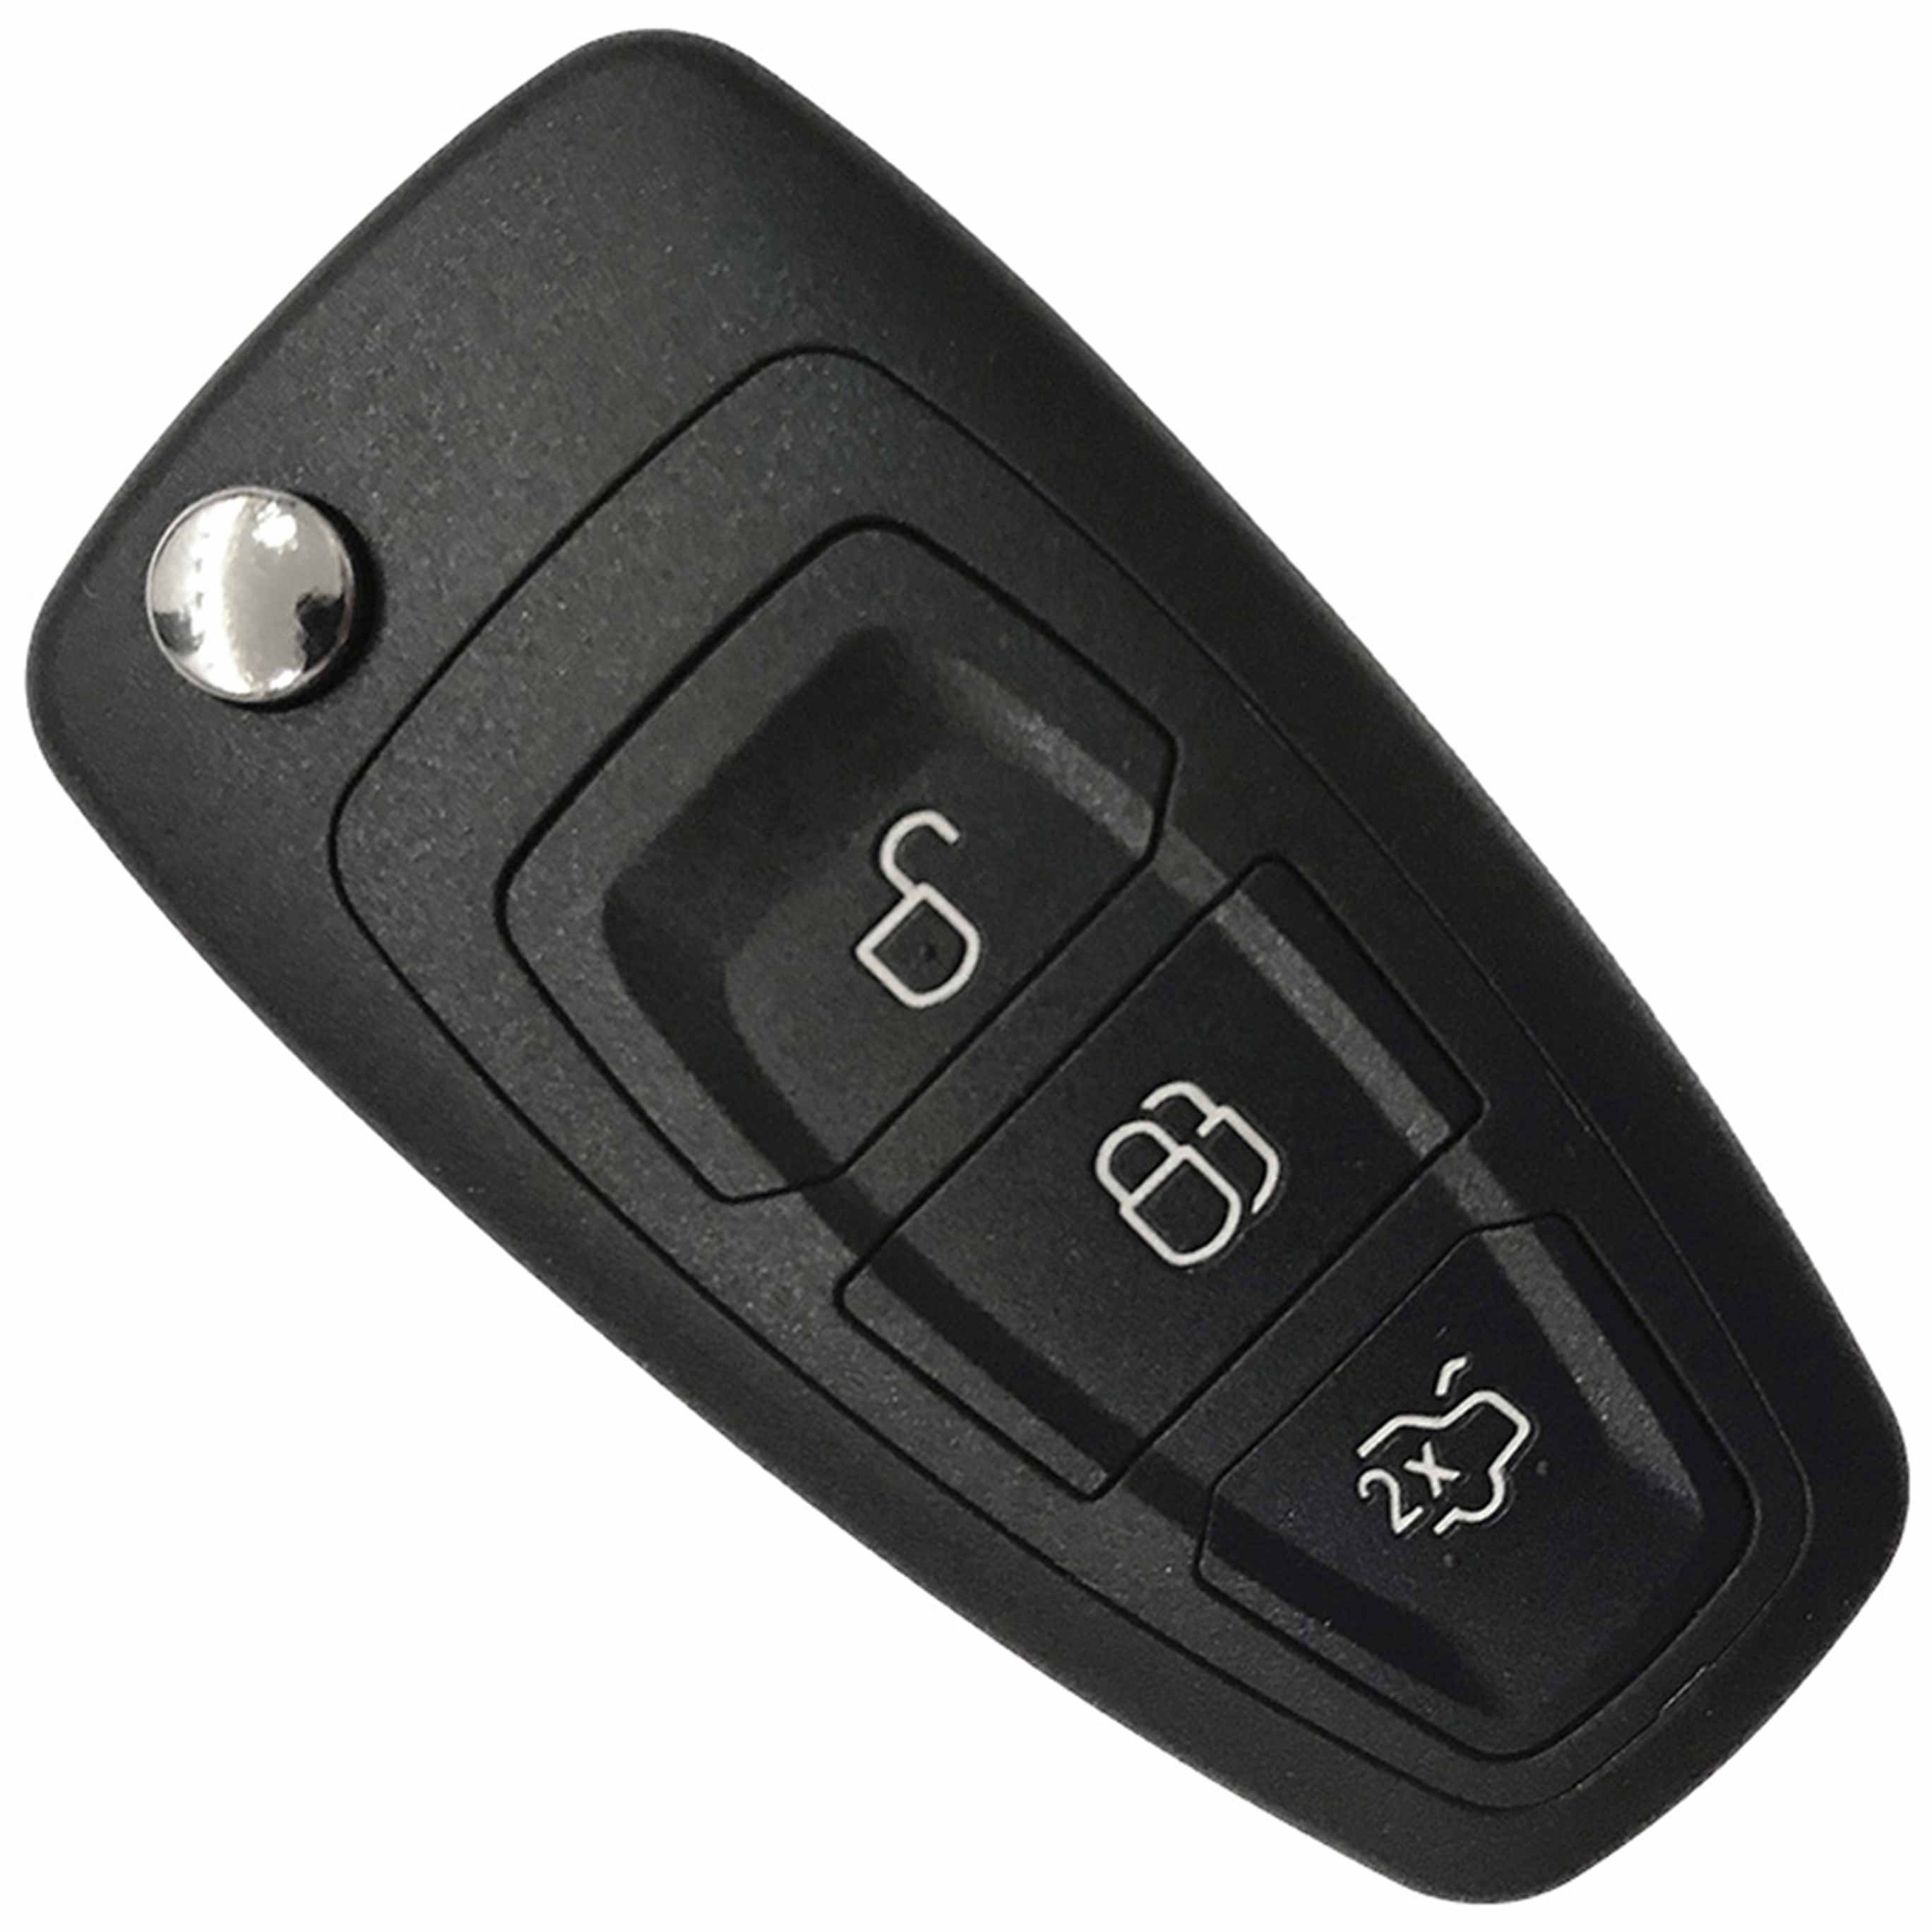  434 MHz Flip Remote Key for 2013 Ford C-Max Focus Galaxy - 4D 63+ Chip